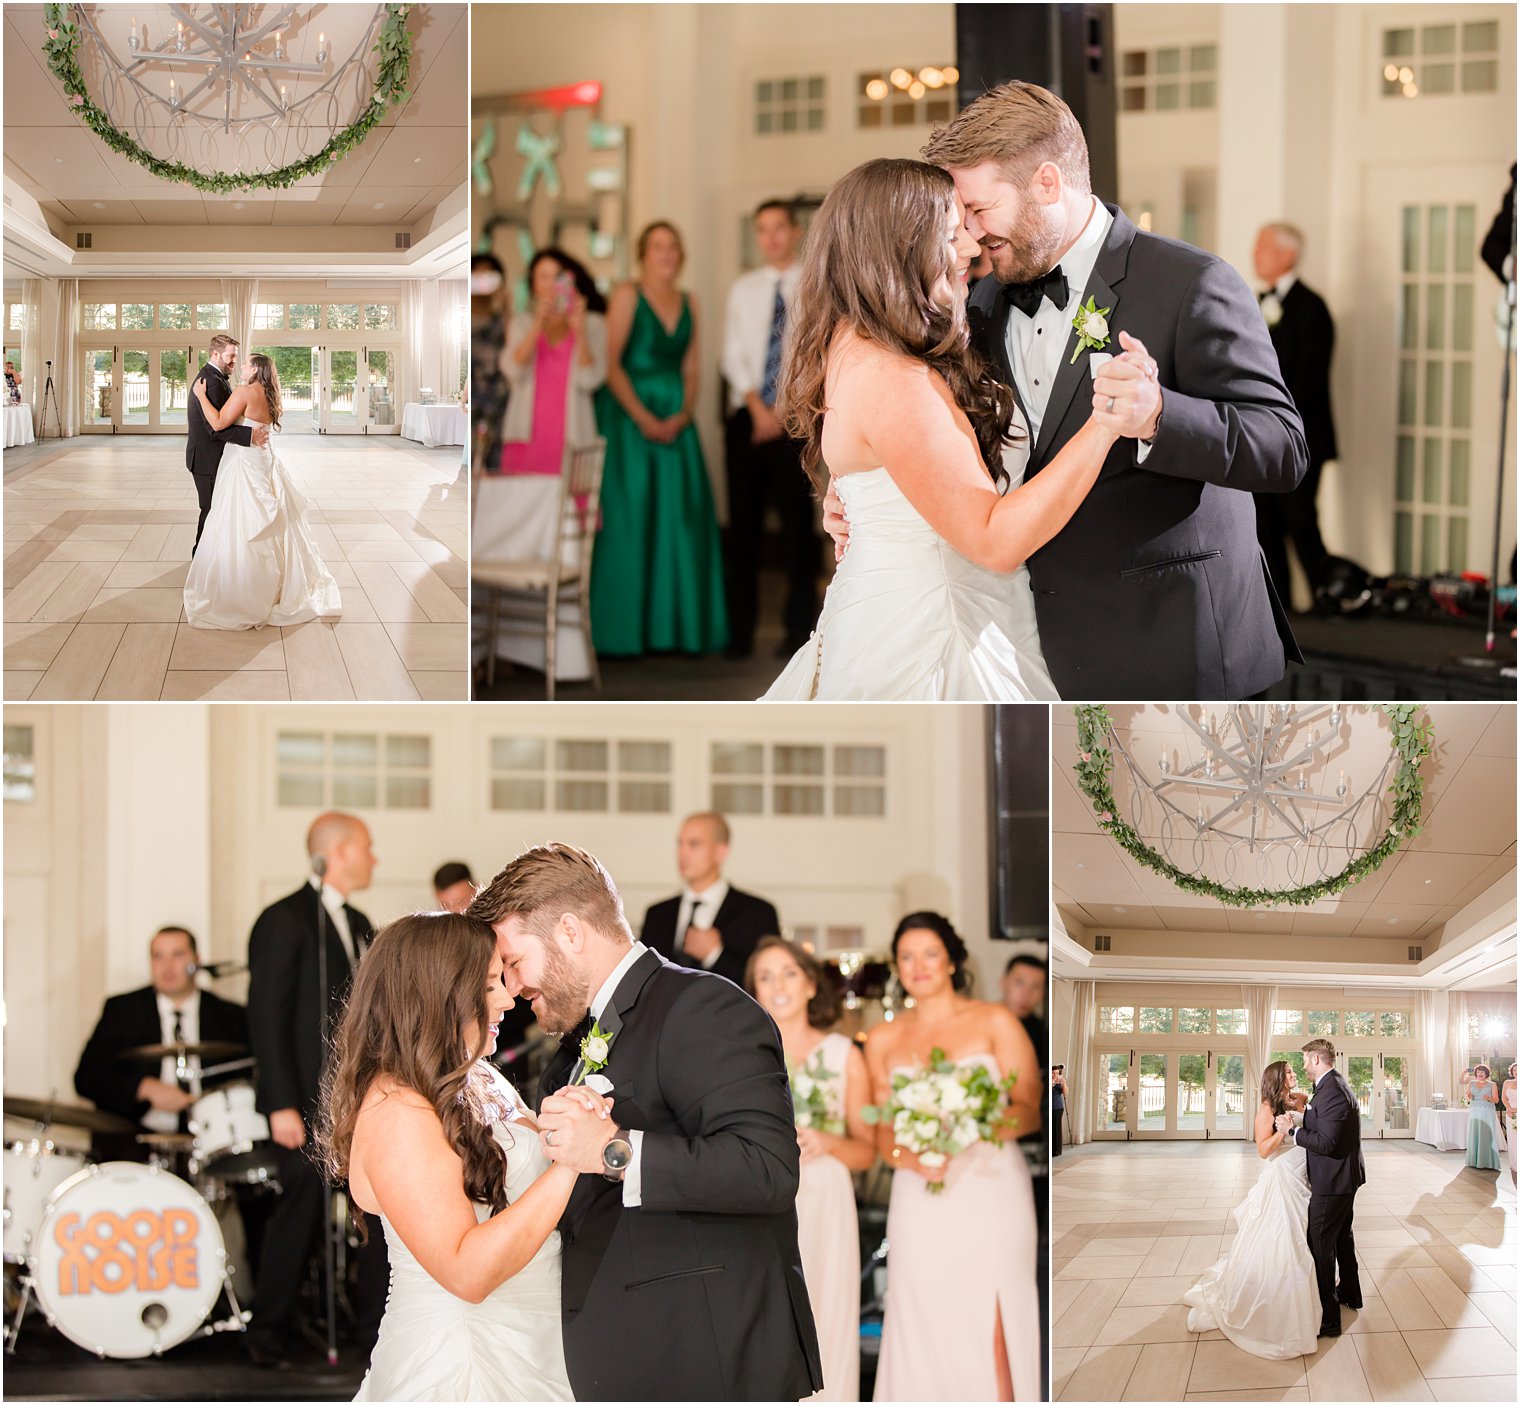 Bride and groom during their first dance at Indian Trail Club 